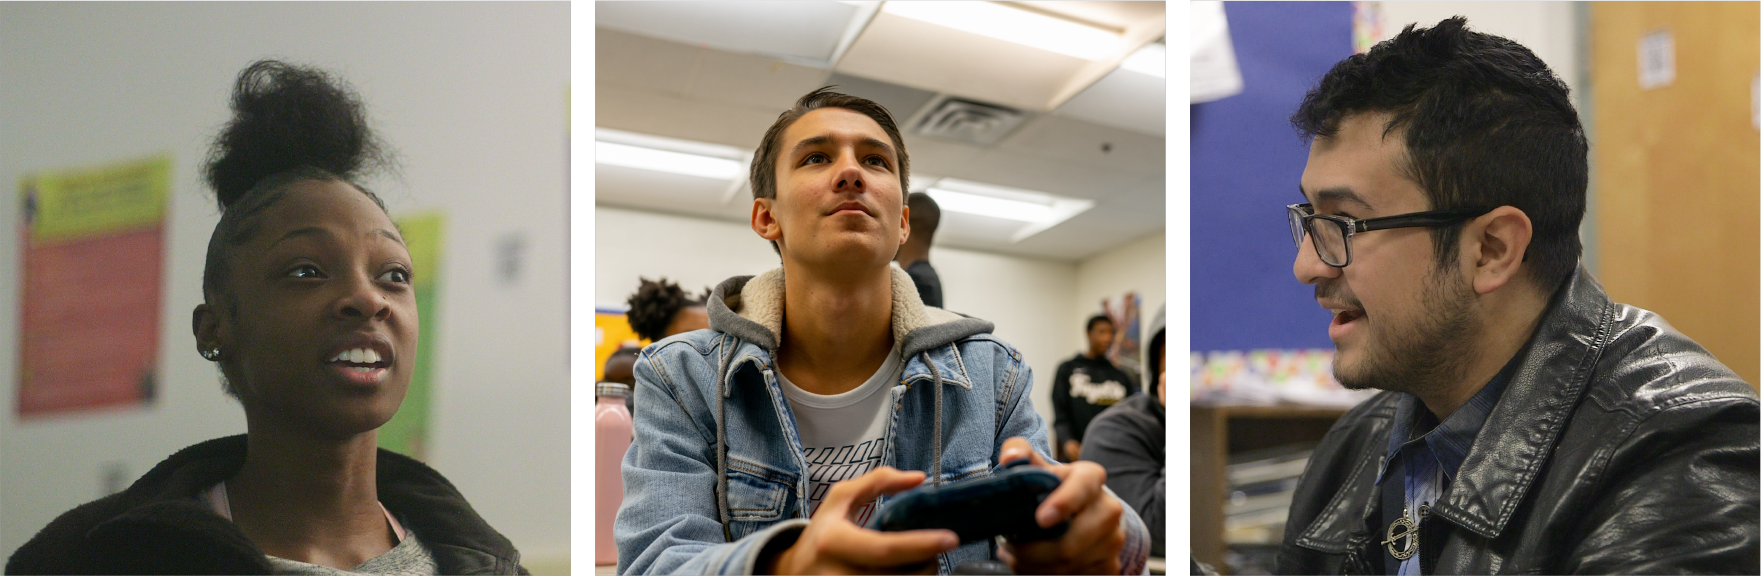 Leveling Up: How Playing Video Games Helped Me Find Passion and Purpose -  iThrive Games Foundation